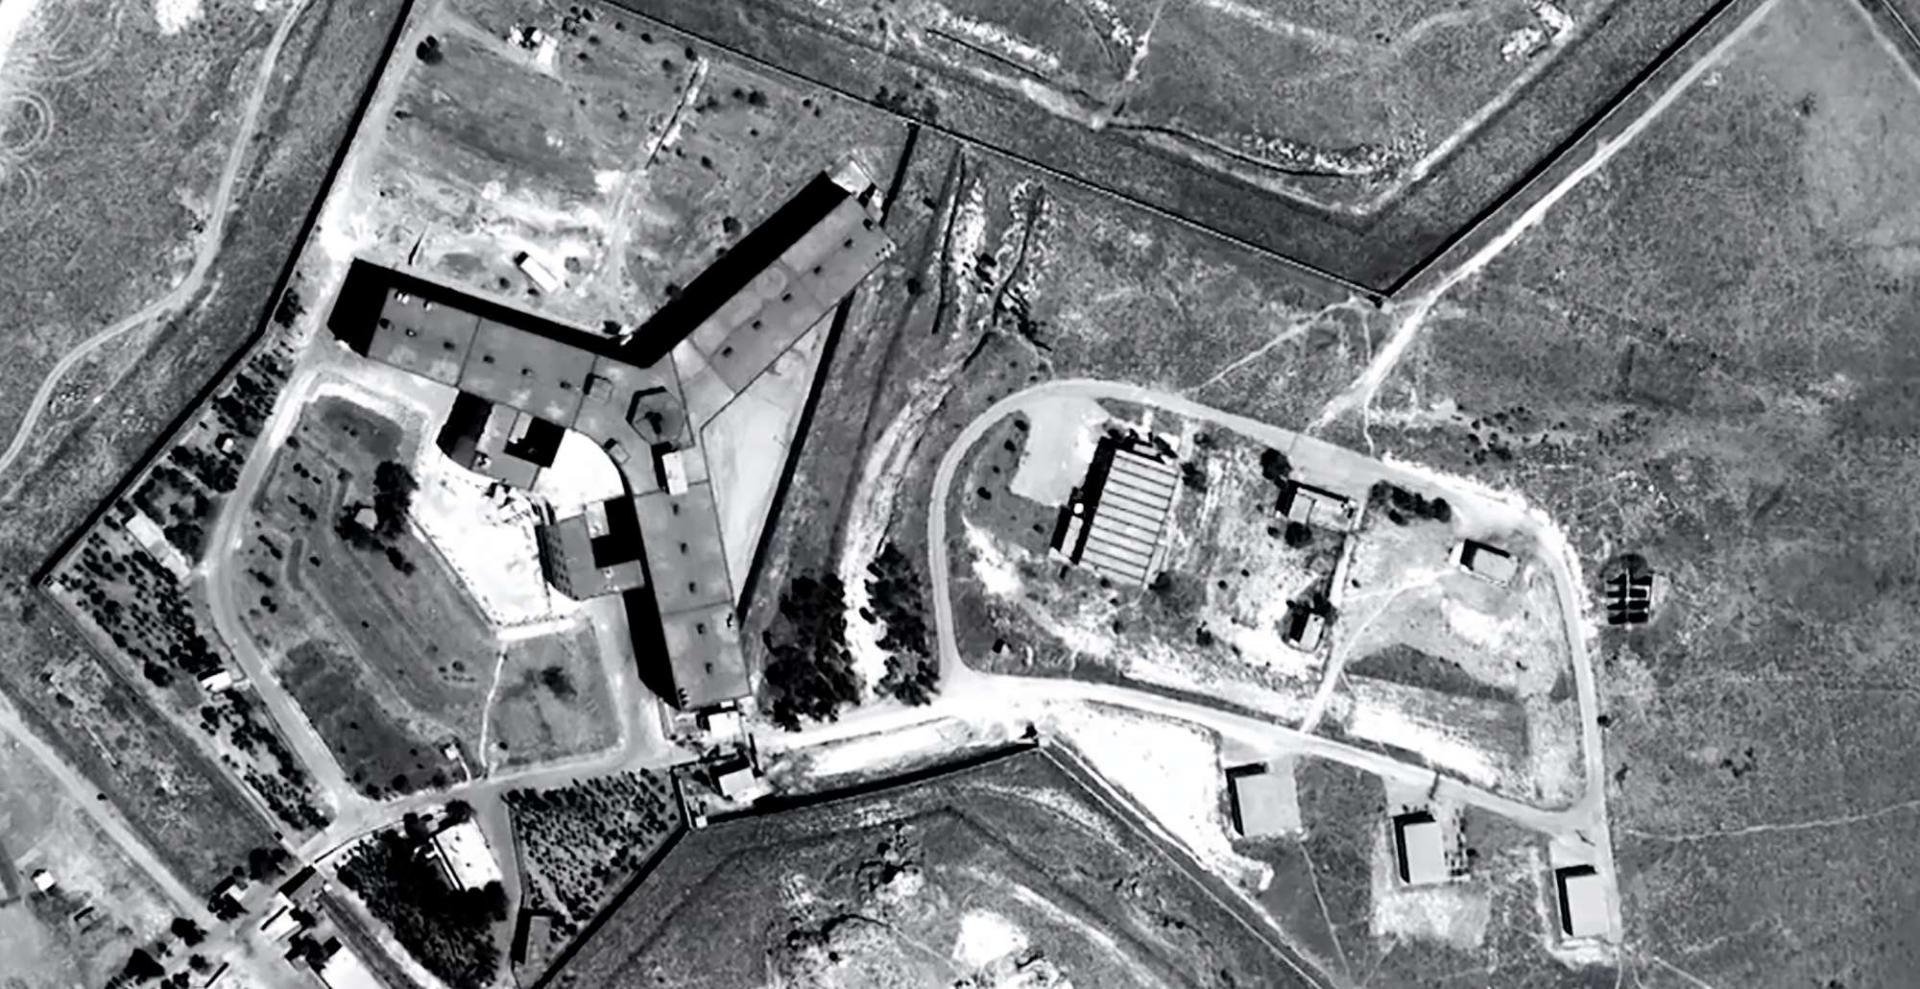 A handout satellite image released on February 7, 2017 by Amnesty International shows the military-run Saydnaya prison near Damascus